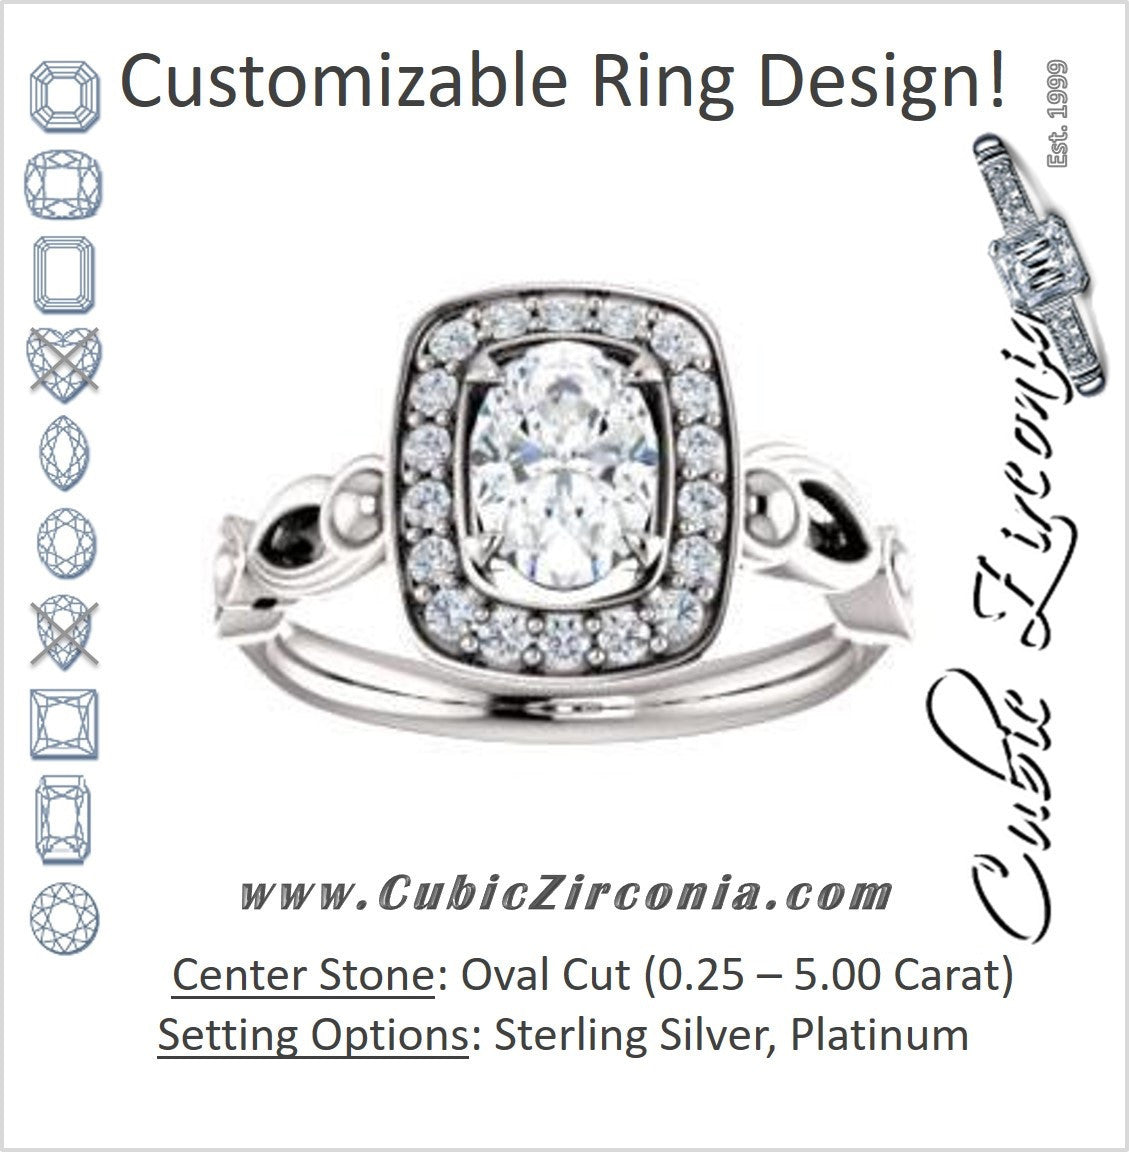 Cubic Zirconia Engagement Ring- The Deb (Customizable Oval Cut Design with Large Halo, Fleur-de-lis Trellis and Bubbled Infinity Band)